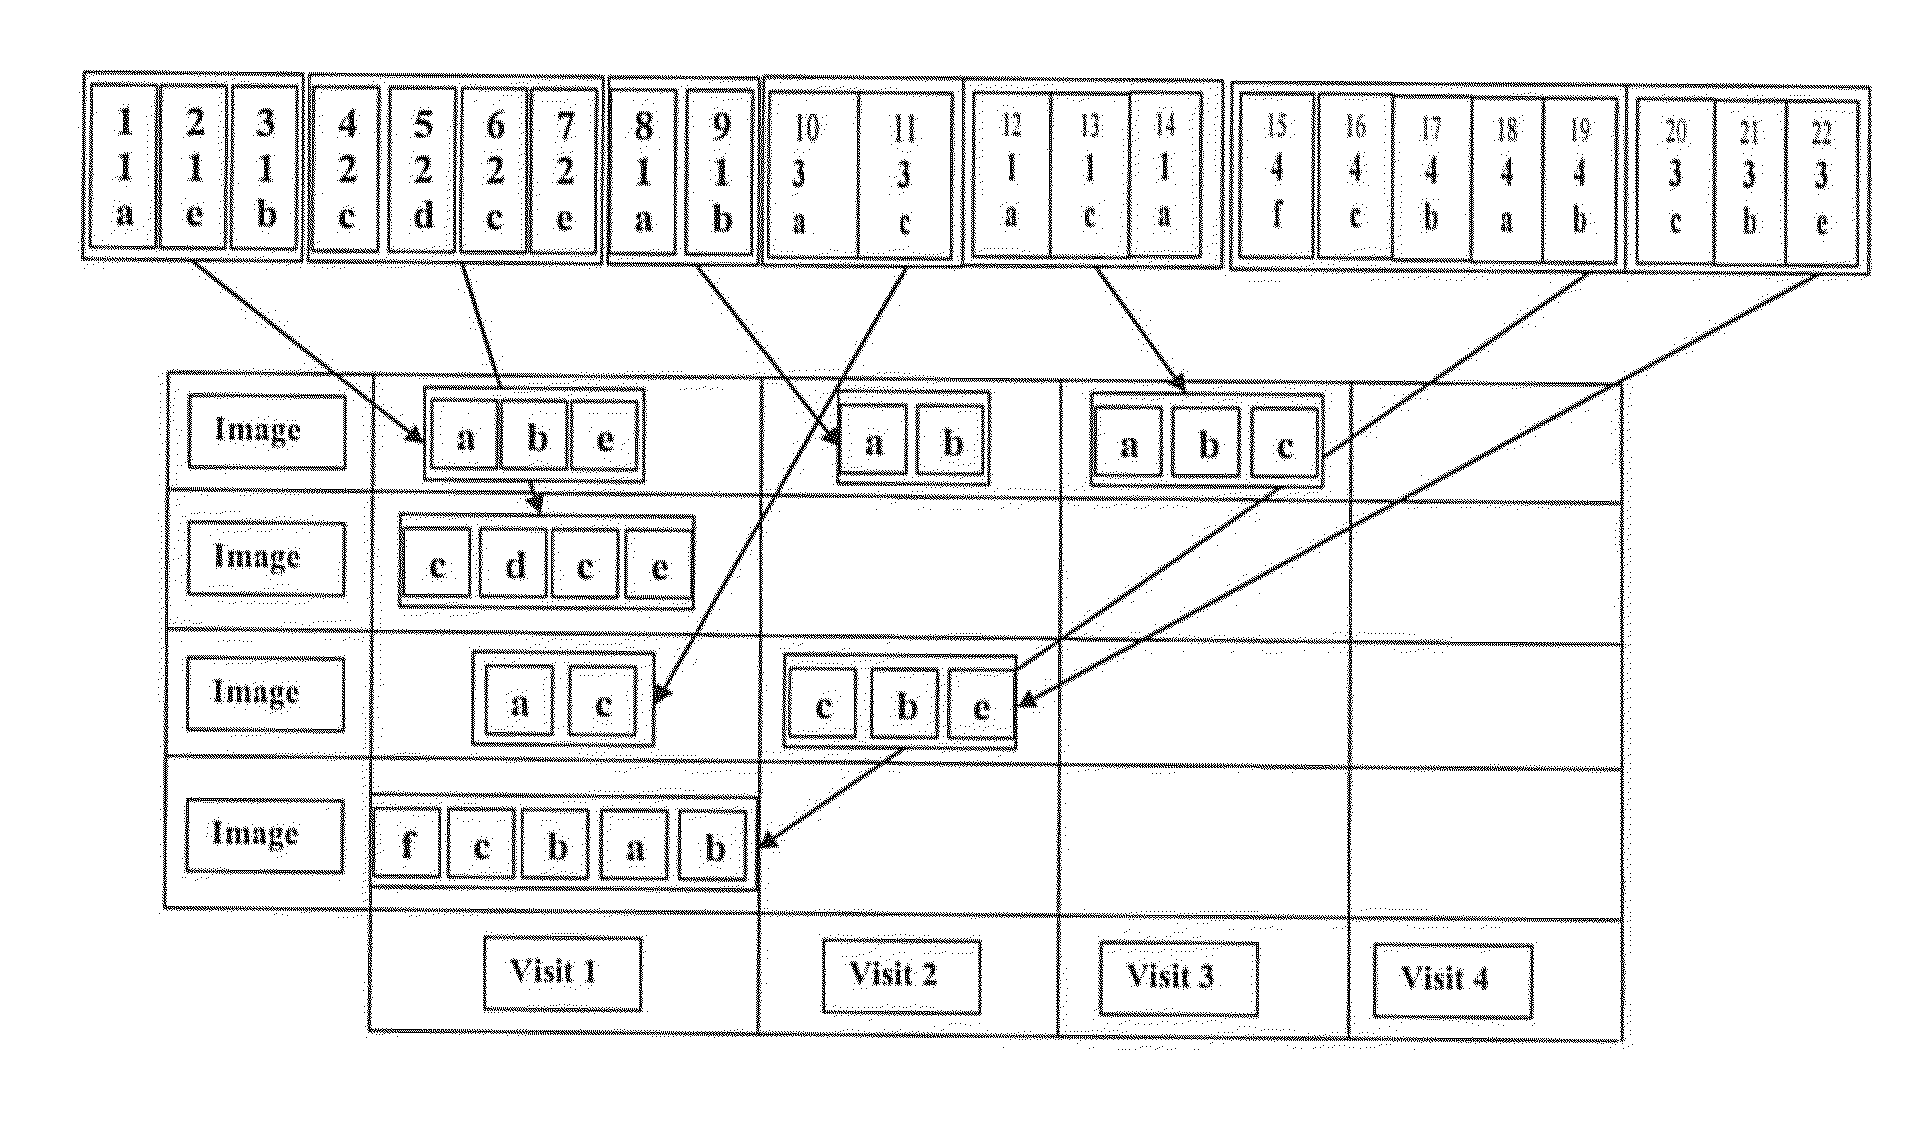 Method of identifying an individual with a disorder or efficacy of a treatment of a disorder